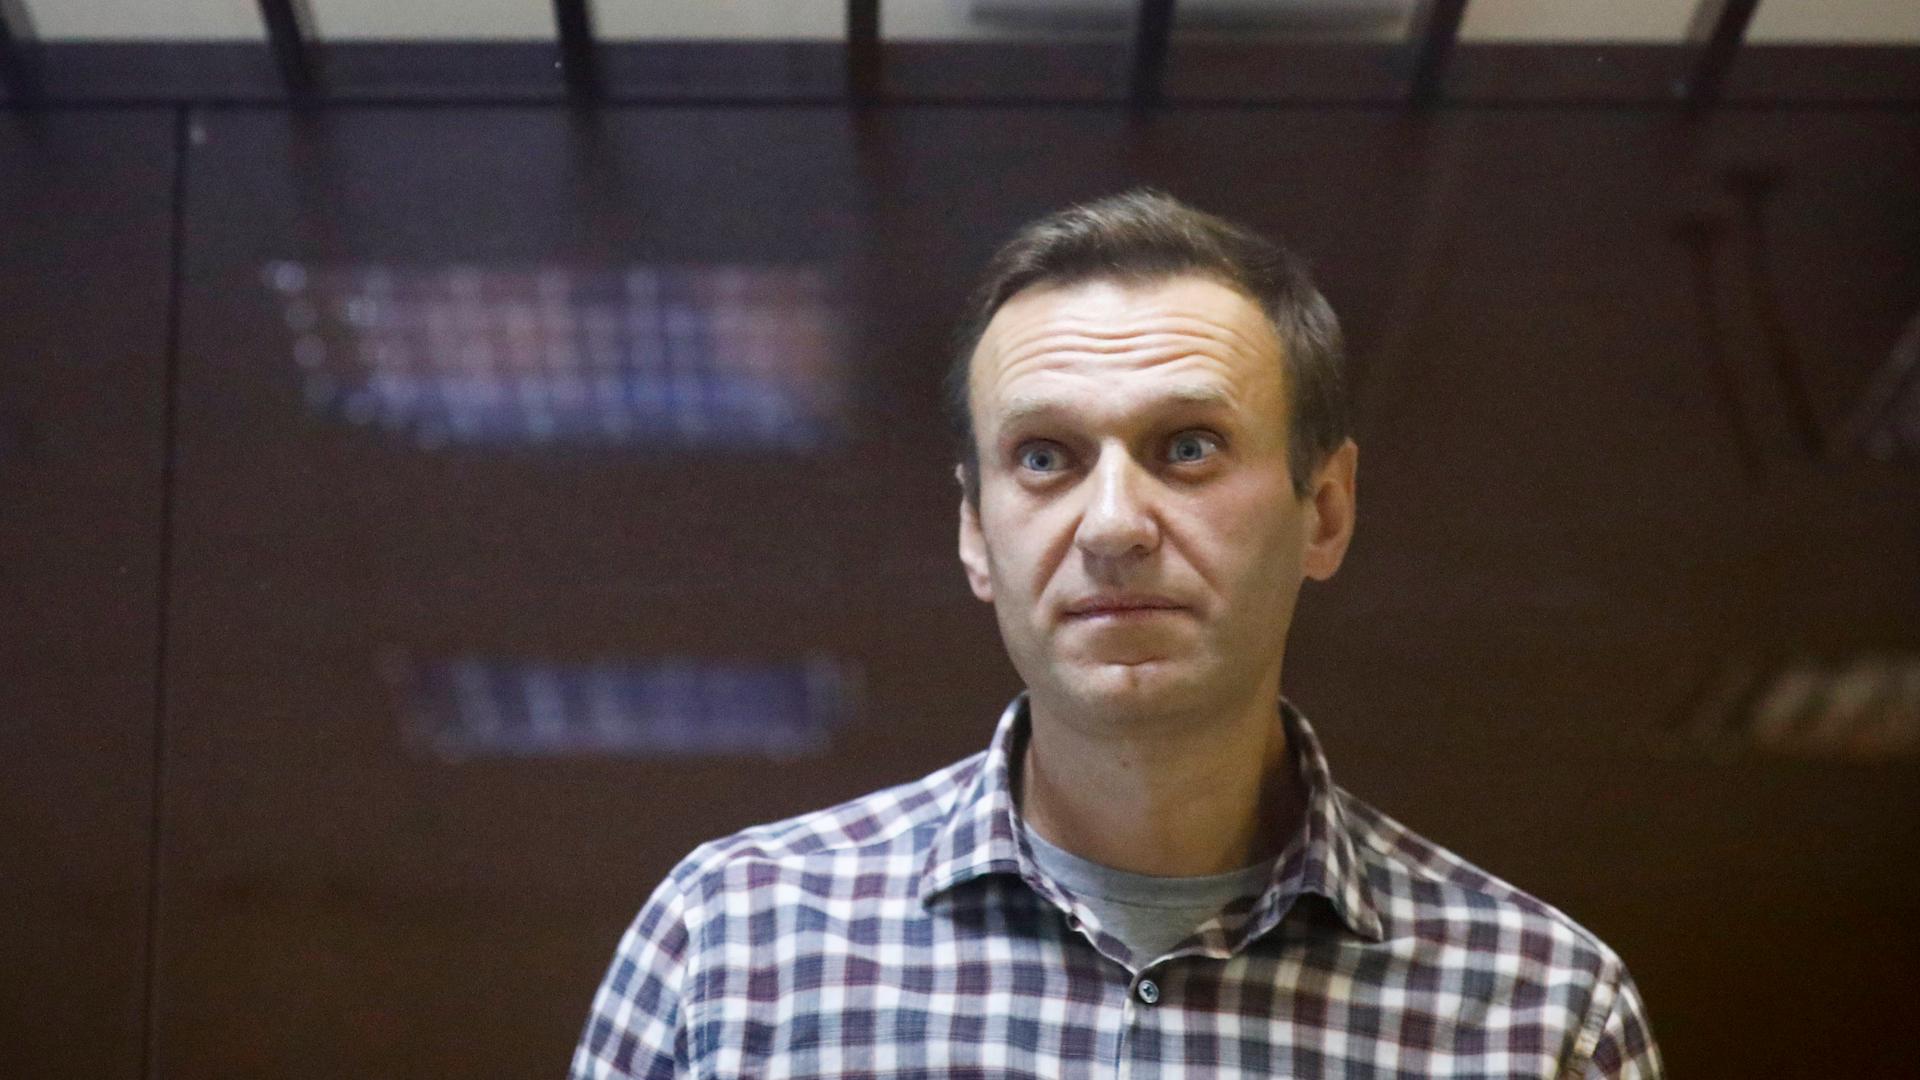 Alexei Navalny wears a plaid shirt and looks a bit startled with his eyes widened at the camera. 